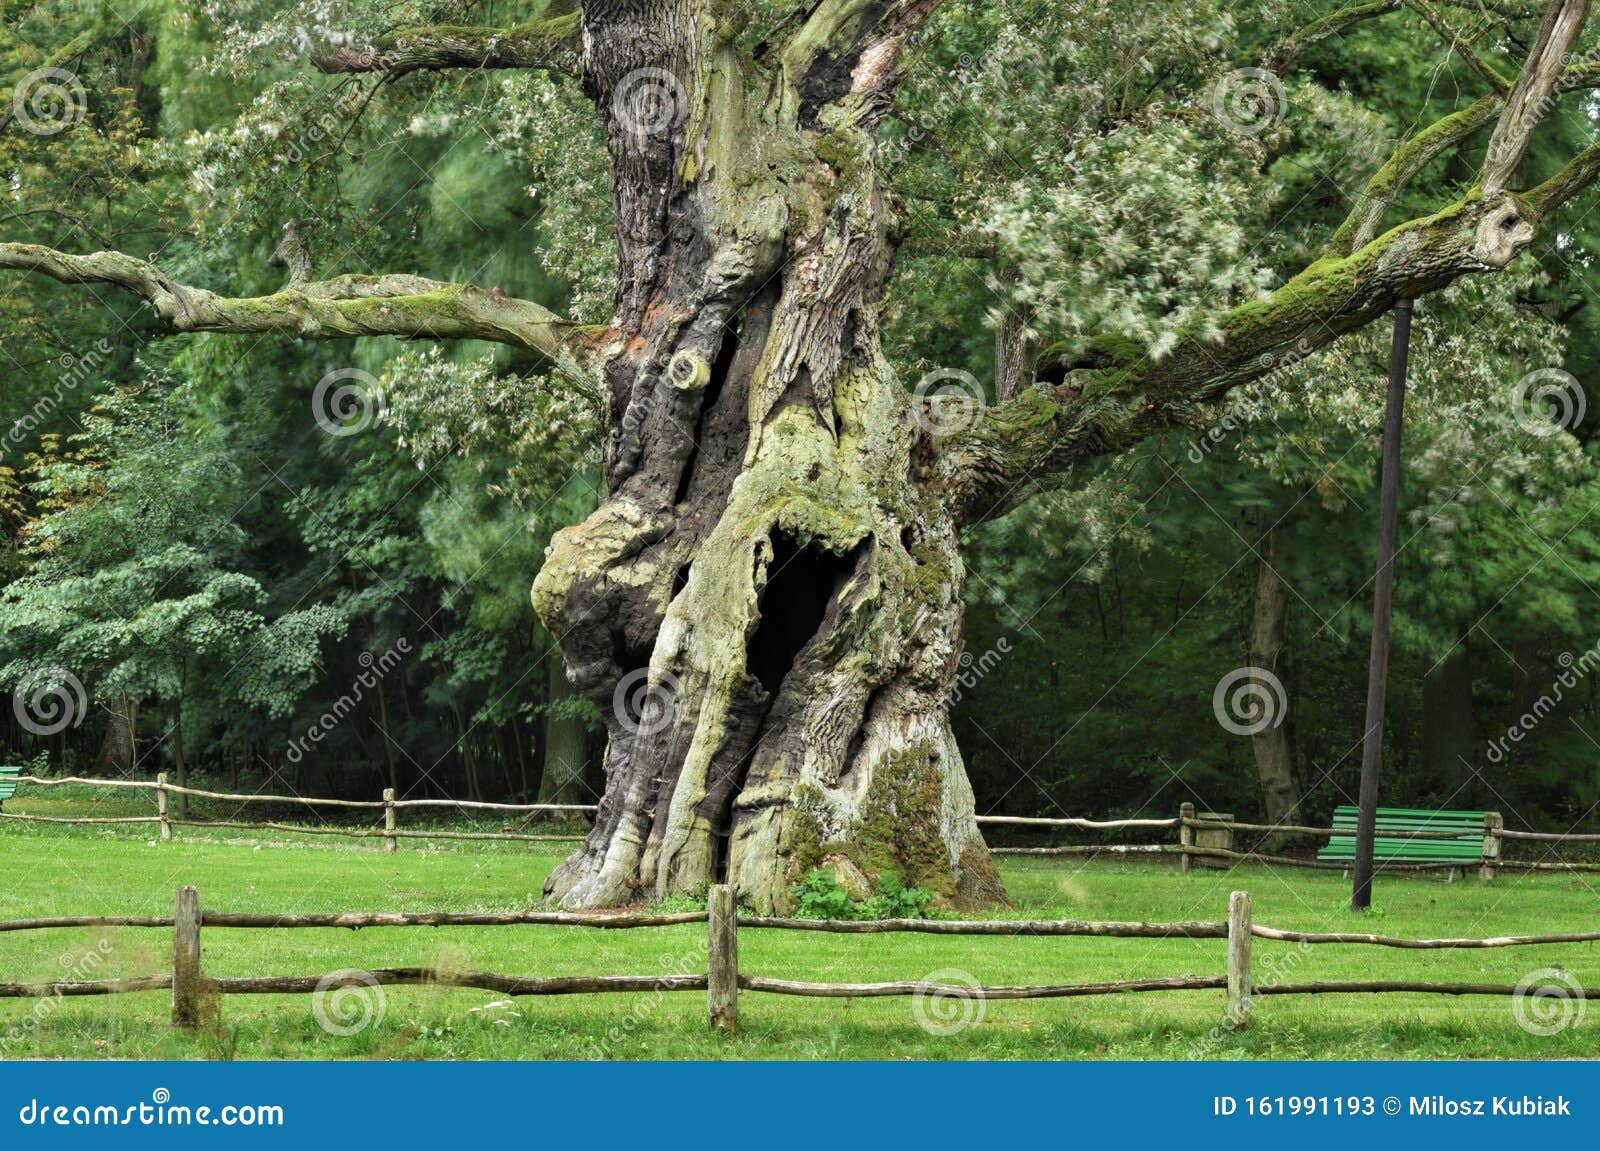 rus seven hundred years old tree.